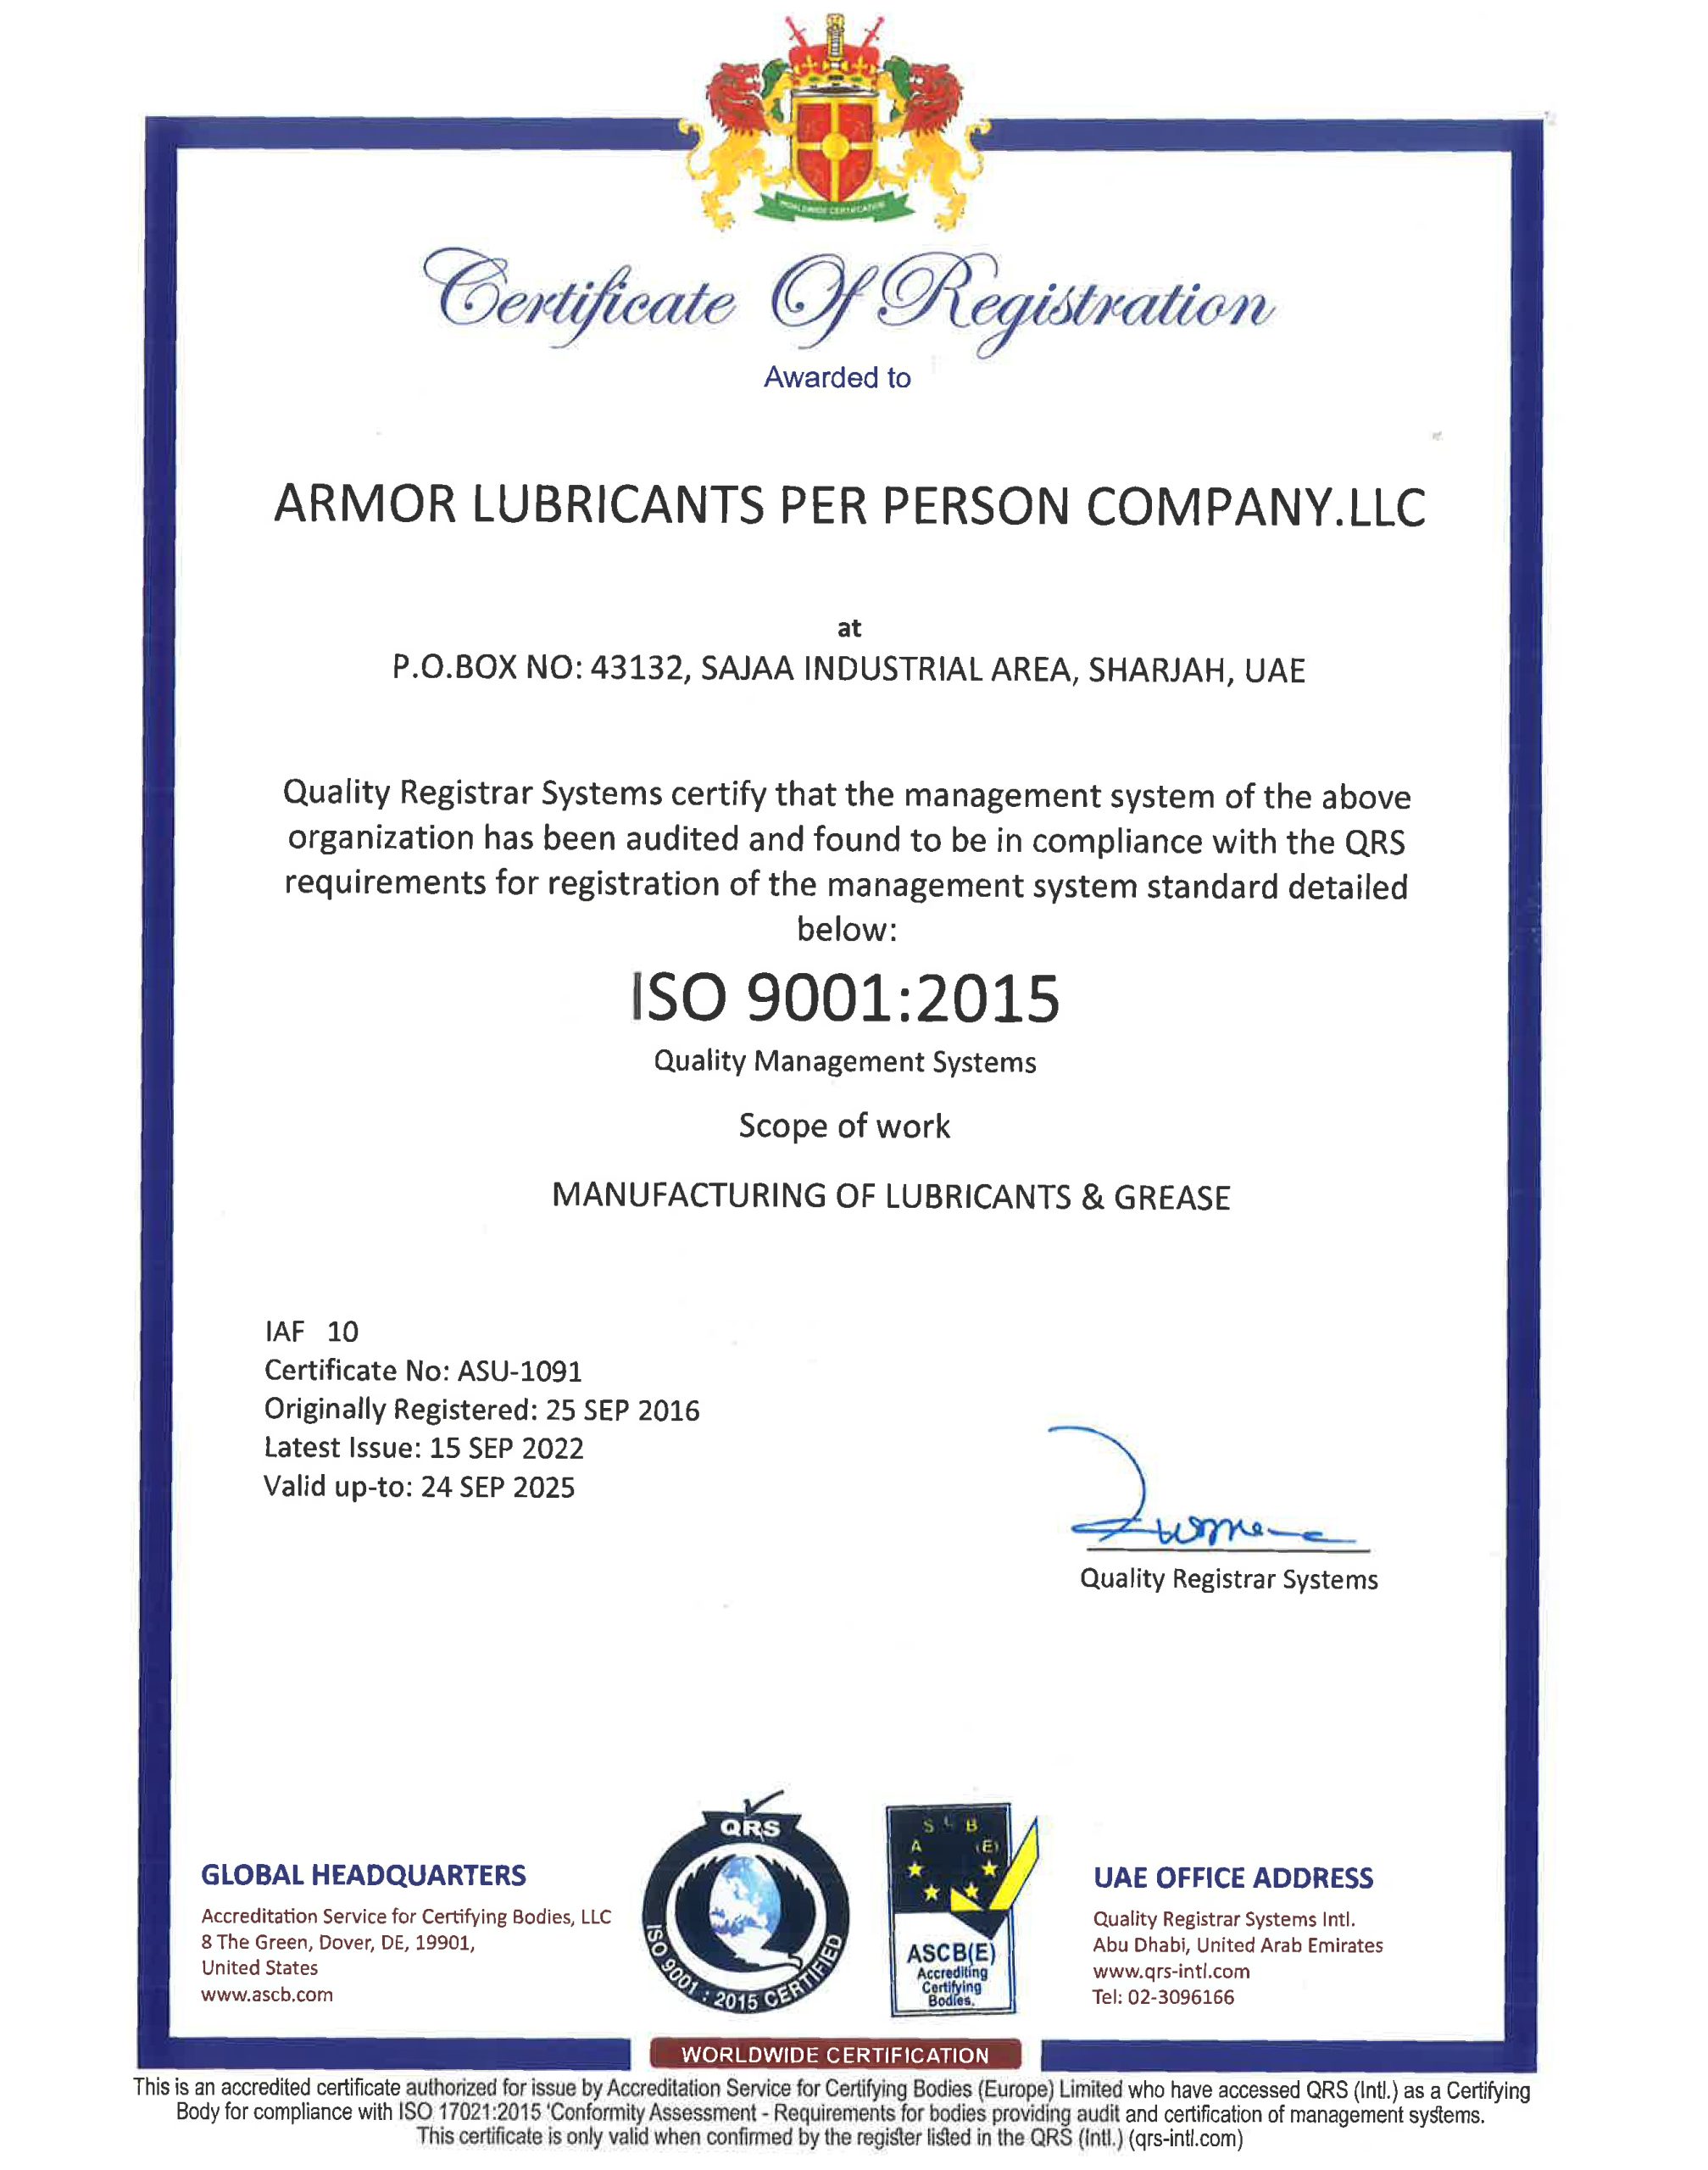 Armor Lubricants Certificate of Registration ISO 9001:2015 Quality Management Systems